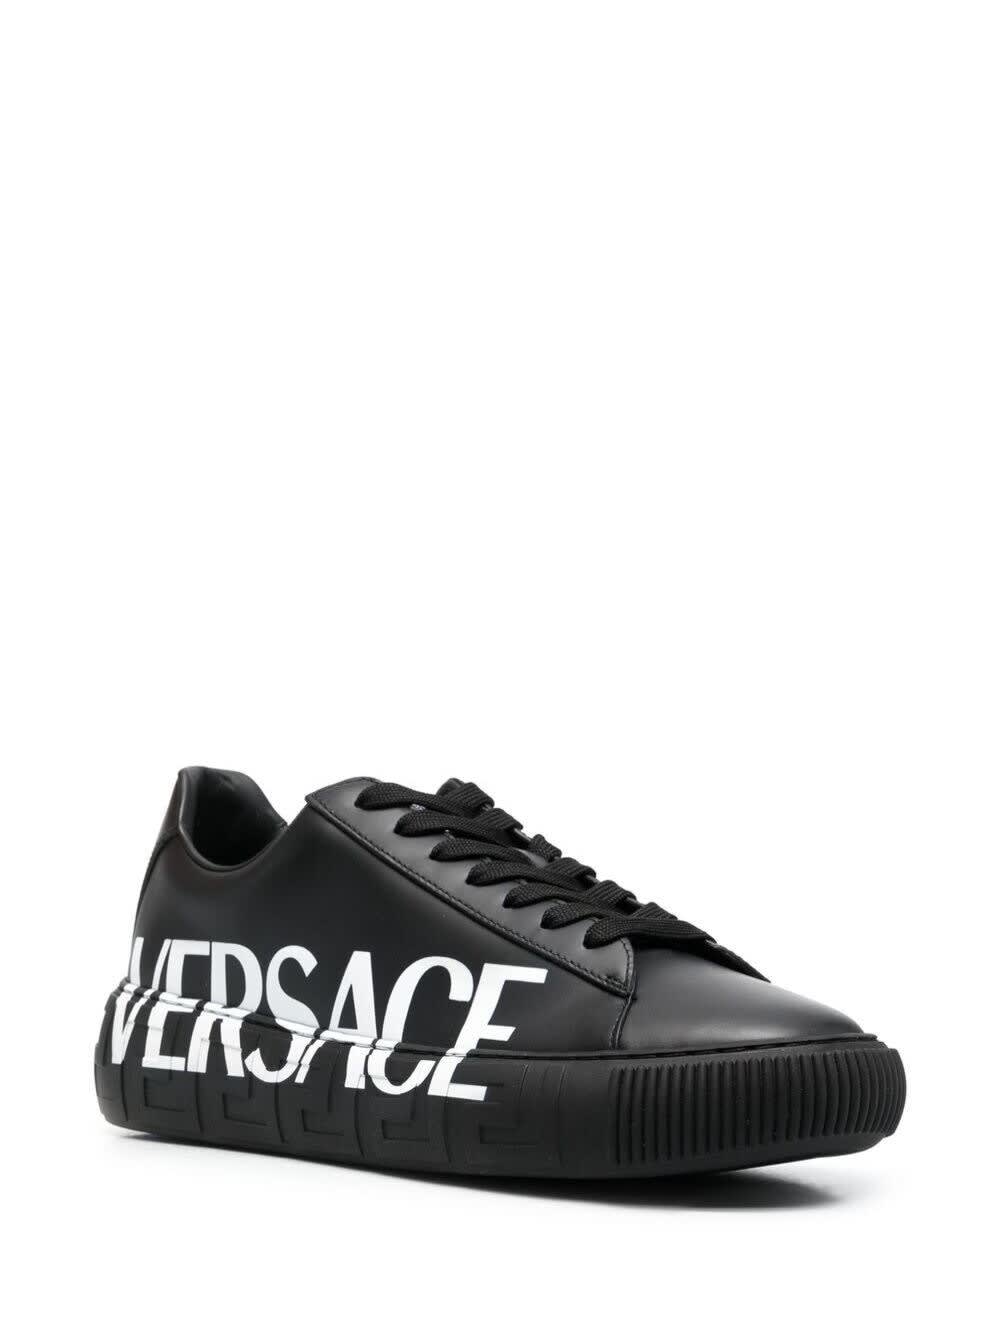 Versace Black Leather Low-top Sneakers Wirth Logo-print